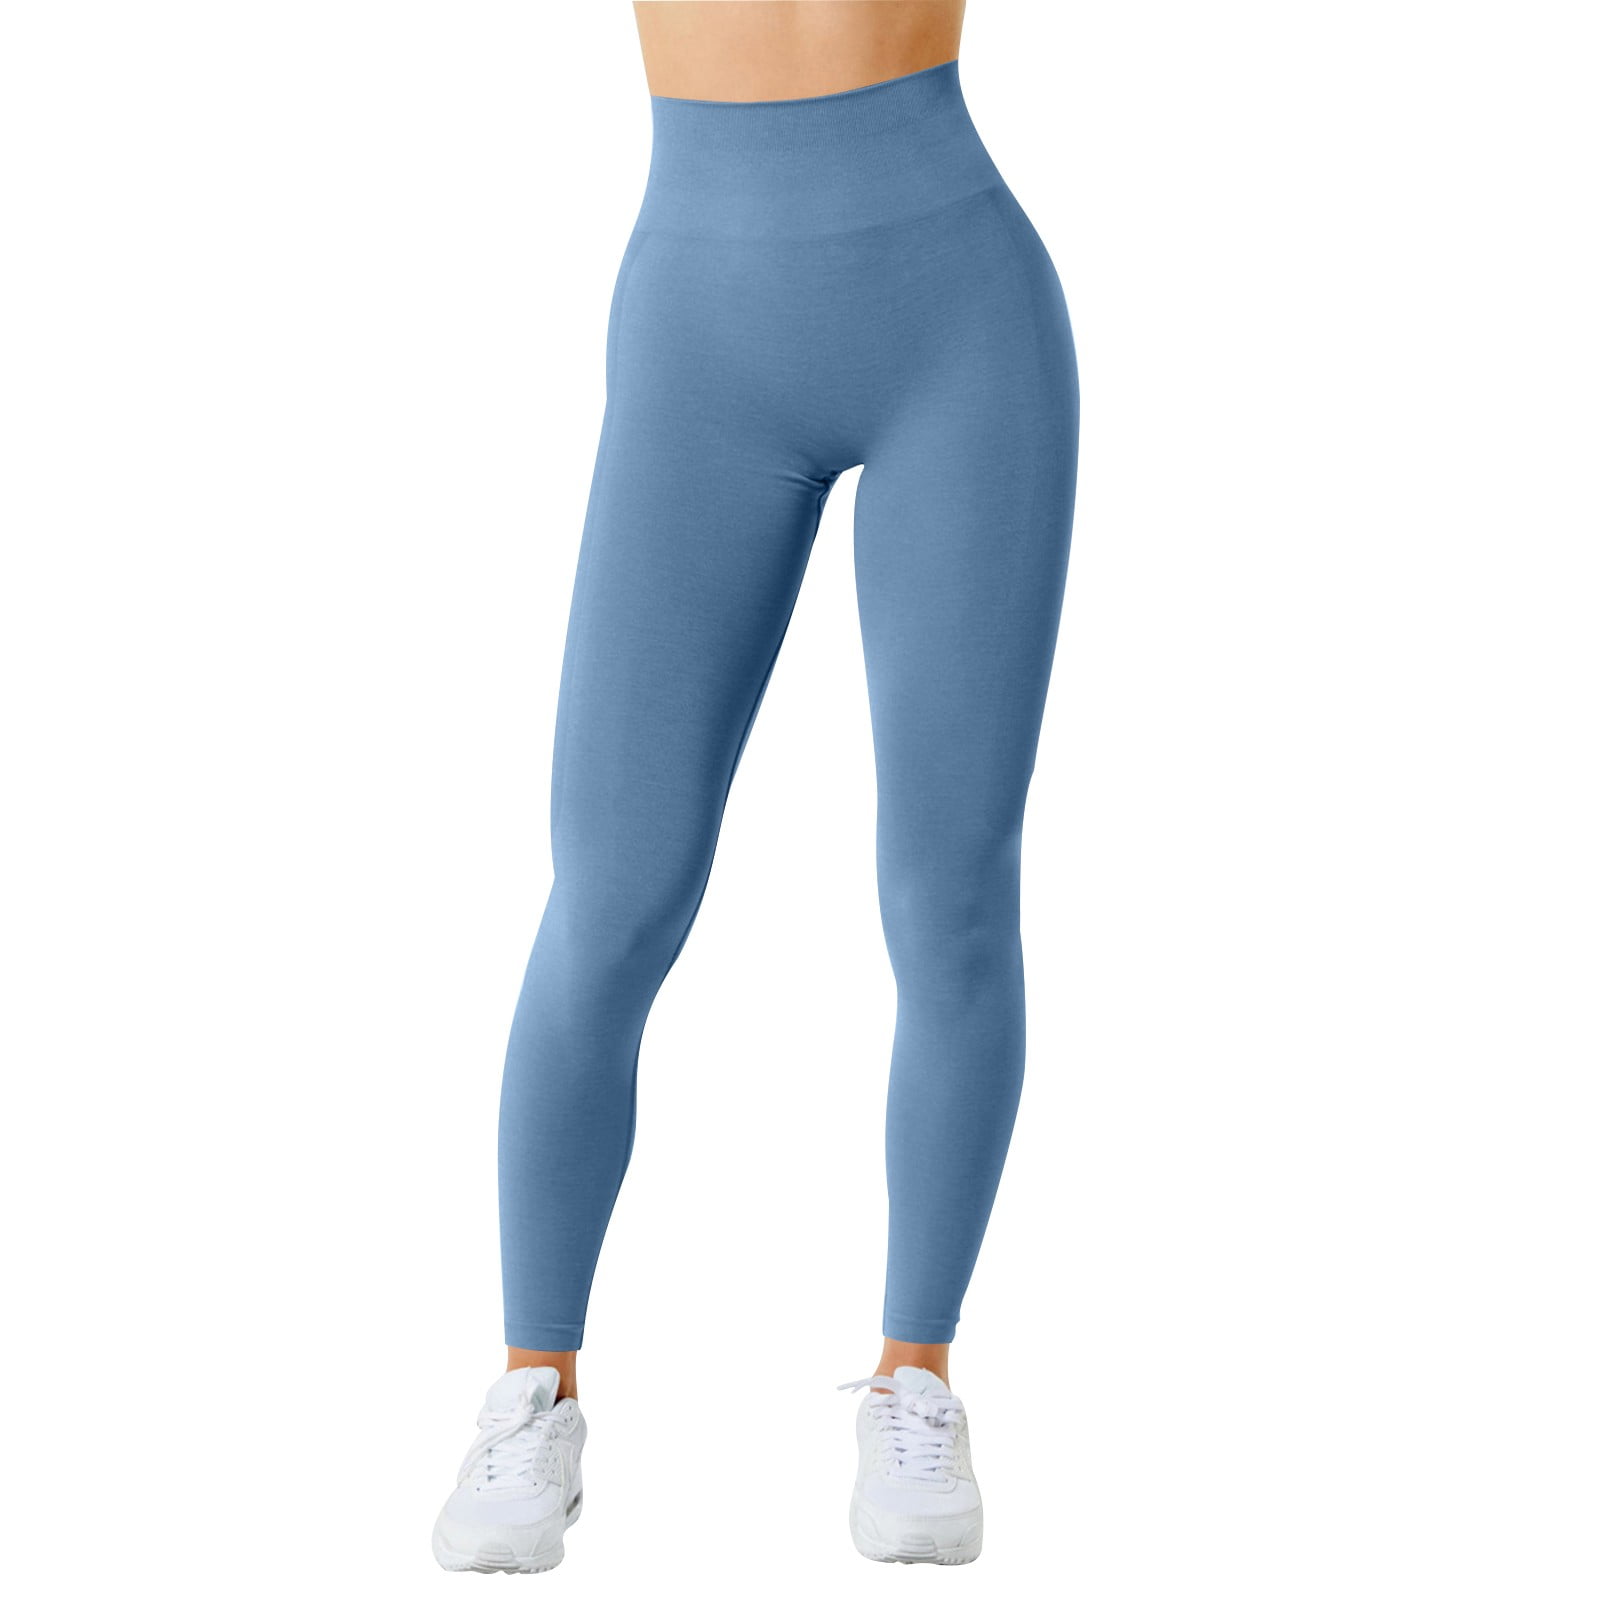 Pants For Women Work Casual Seamless Tight High Waisted Elastic